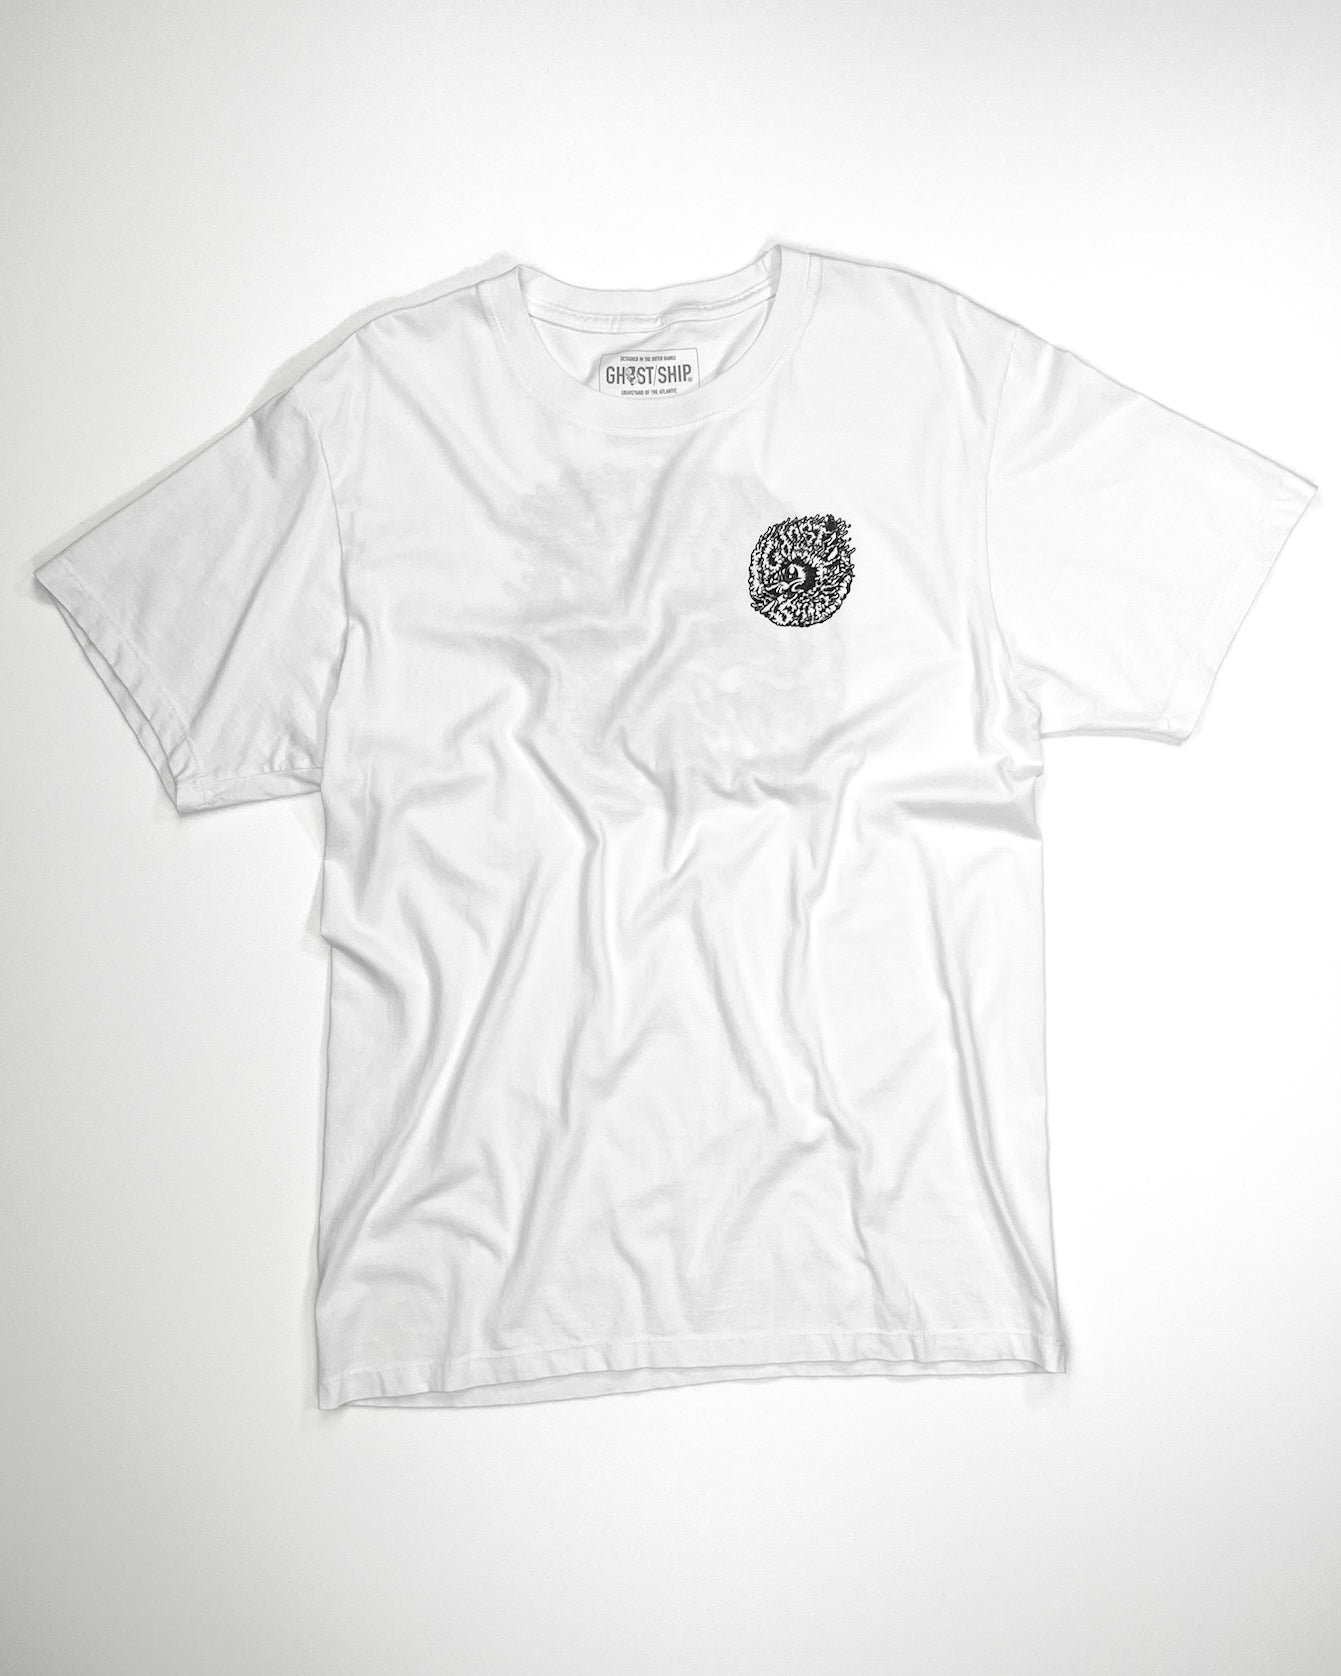 Eye Of The Storm White Tee - GHOSTSHIP.Supply